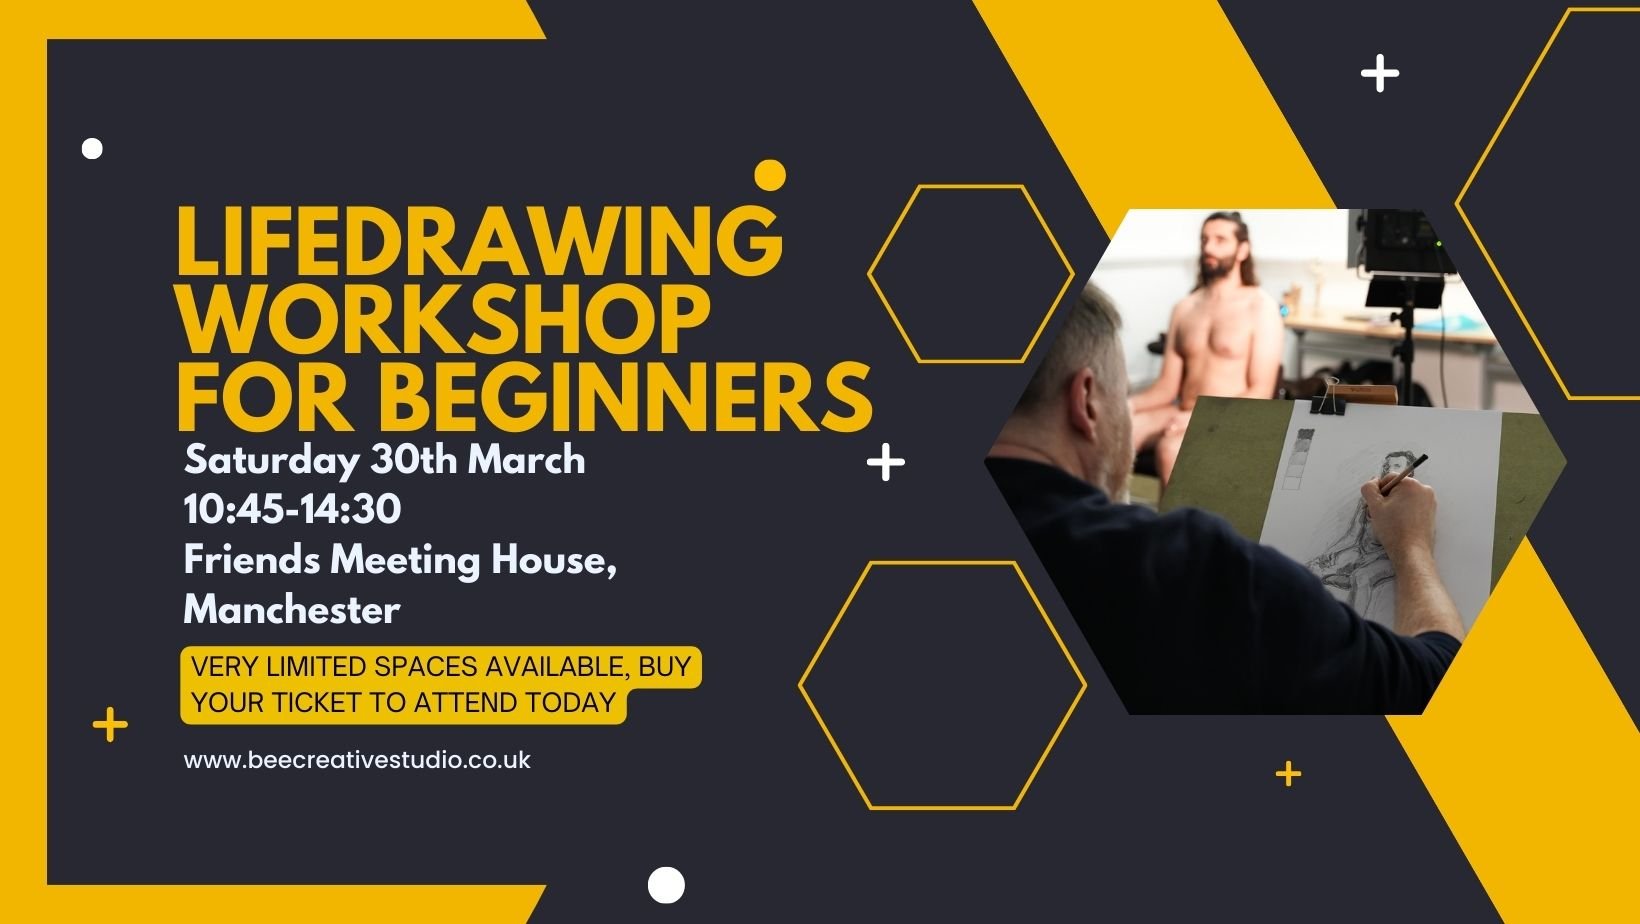 Learn Life Drawing for Beginners Workshop
